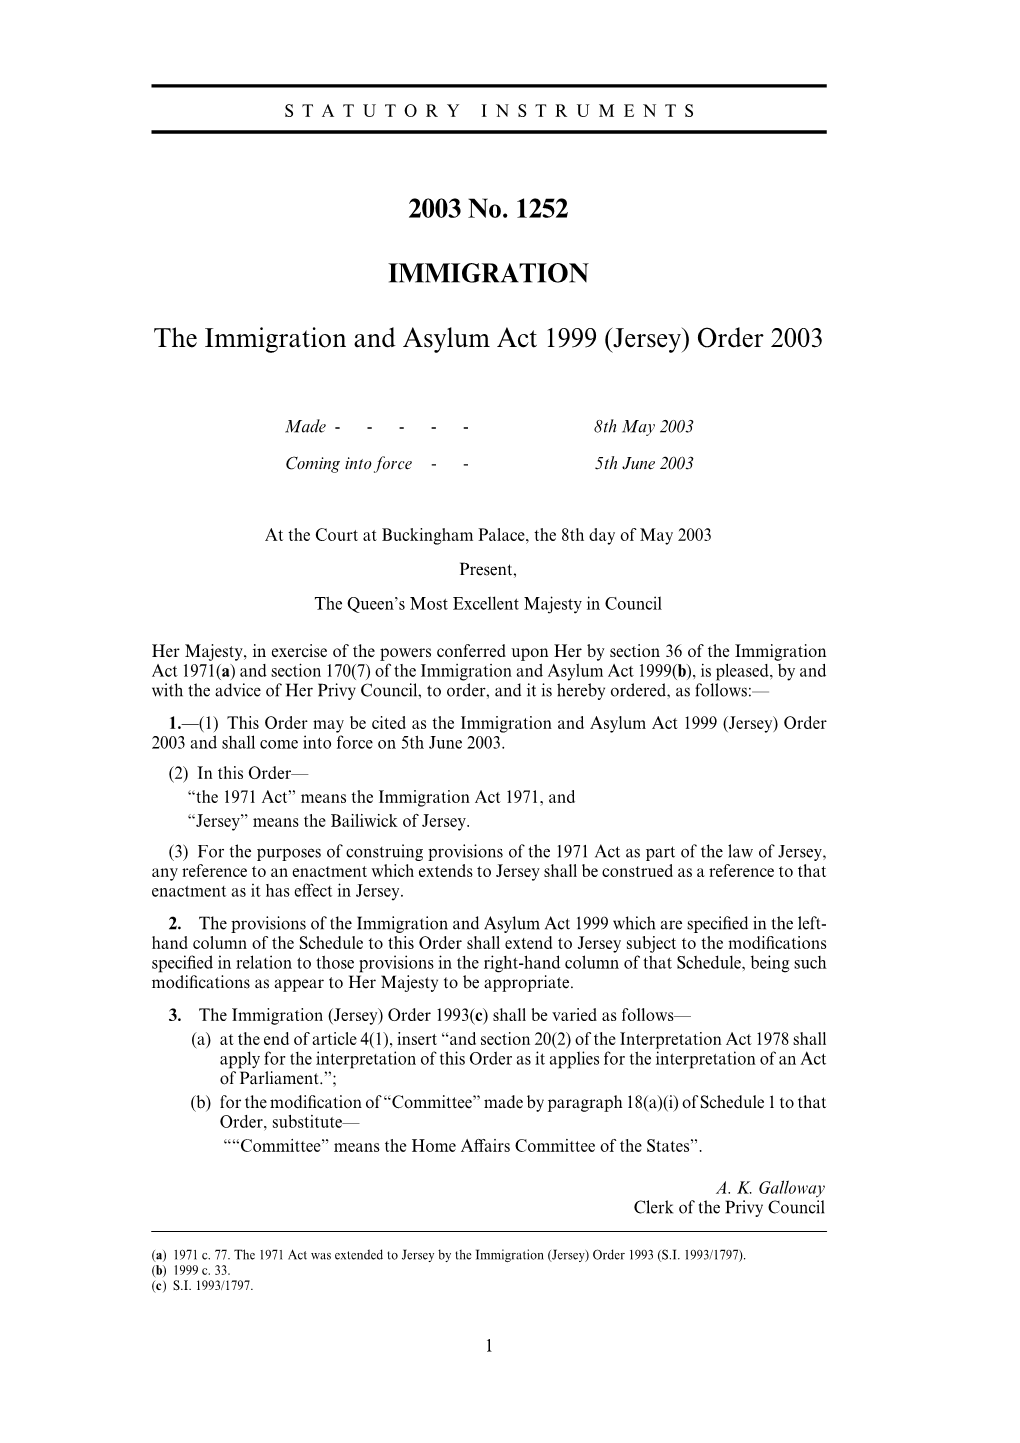 The Immigration and Asylum Act 1999 (Jersey) Order 2003